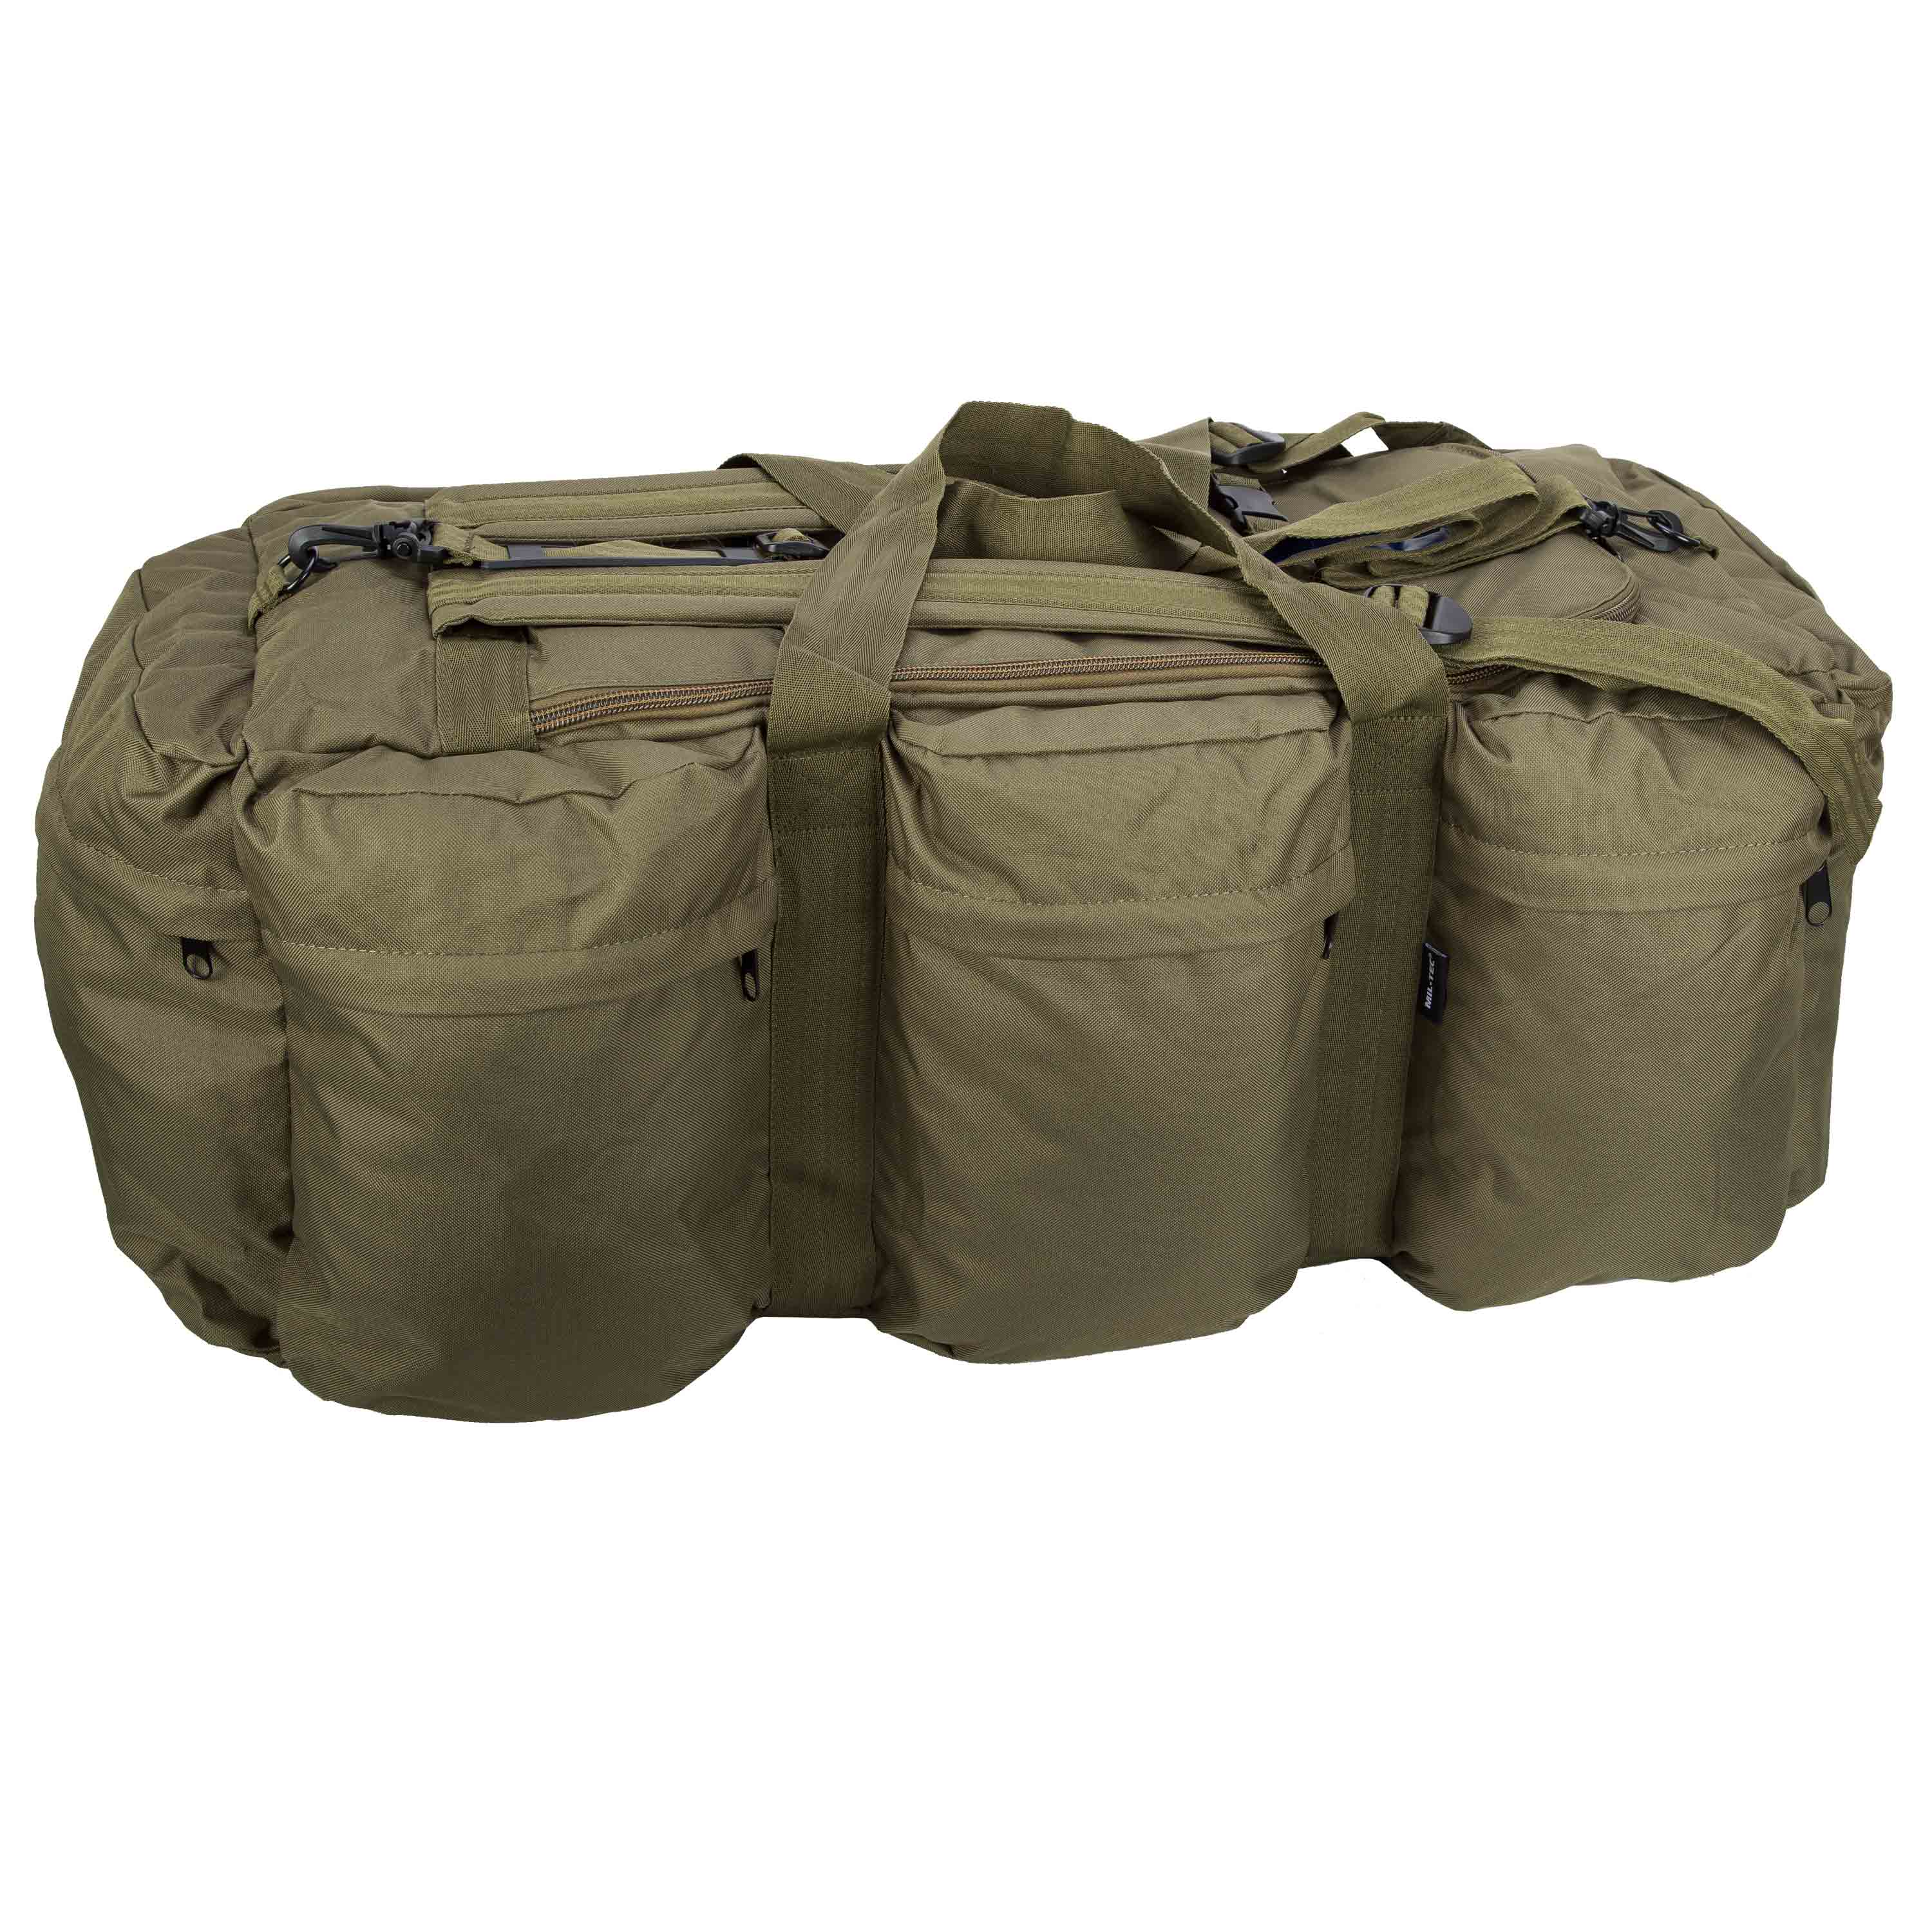 OLIVE GREEN DEPLOYMENT HOLDALL 100L BAG TACTICAL ASSAULT RUCKSACK NEW ARMY 